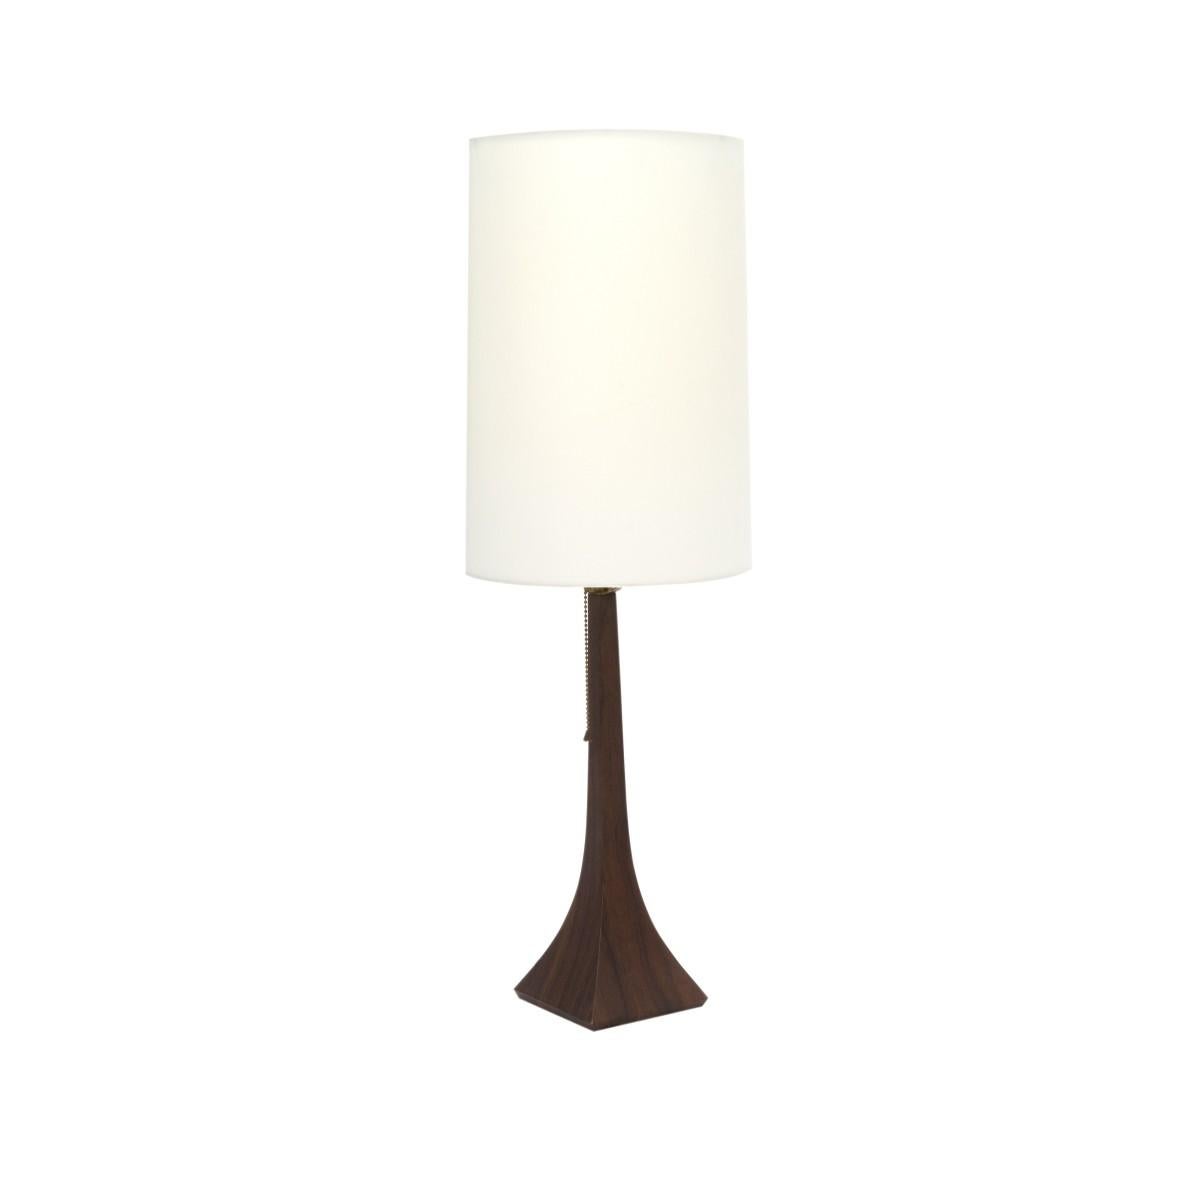 A sleek table lamp by Laurel, USA, circa 1960.

Includes tall drum paper shade.

Dimensions with shade:17